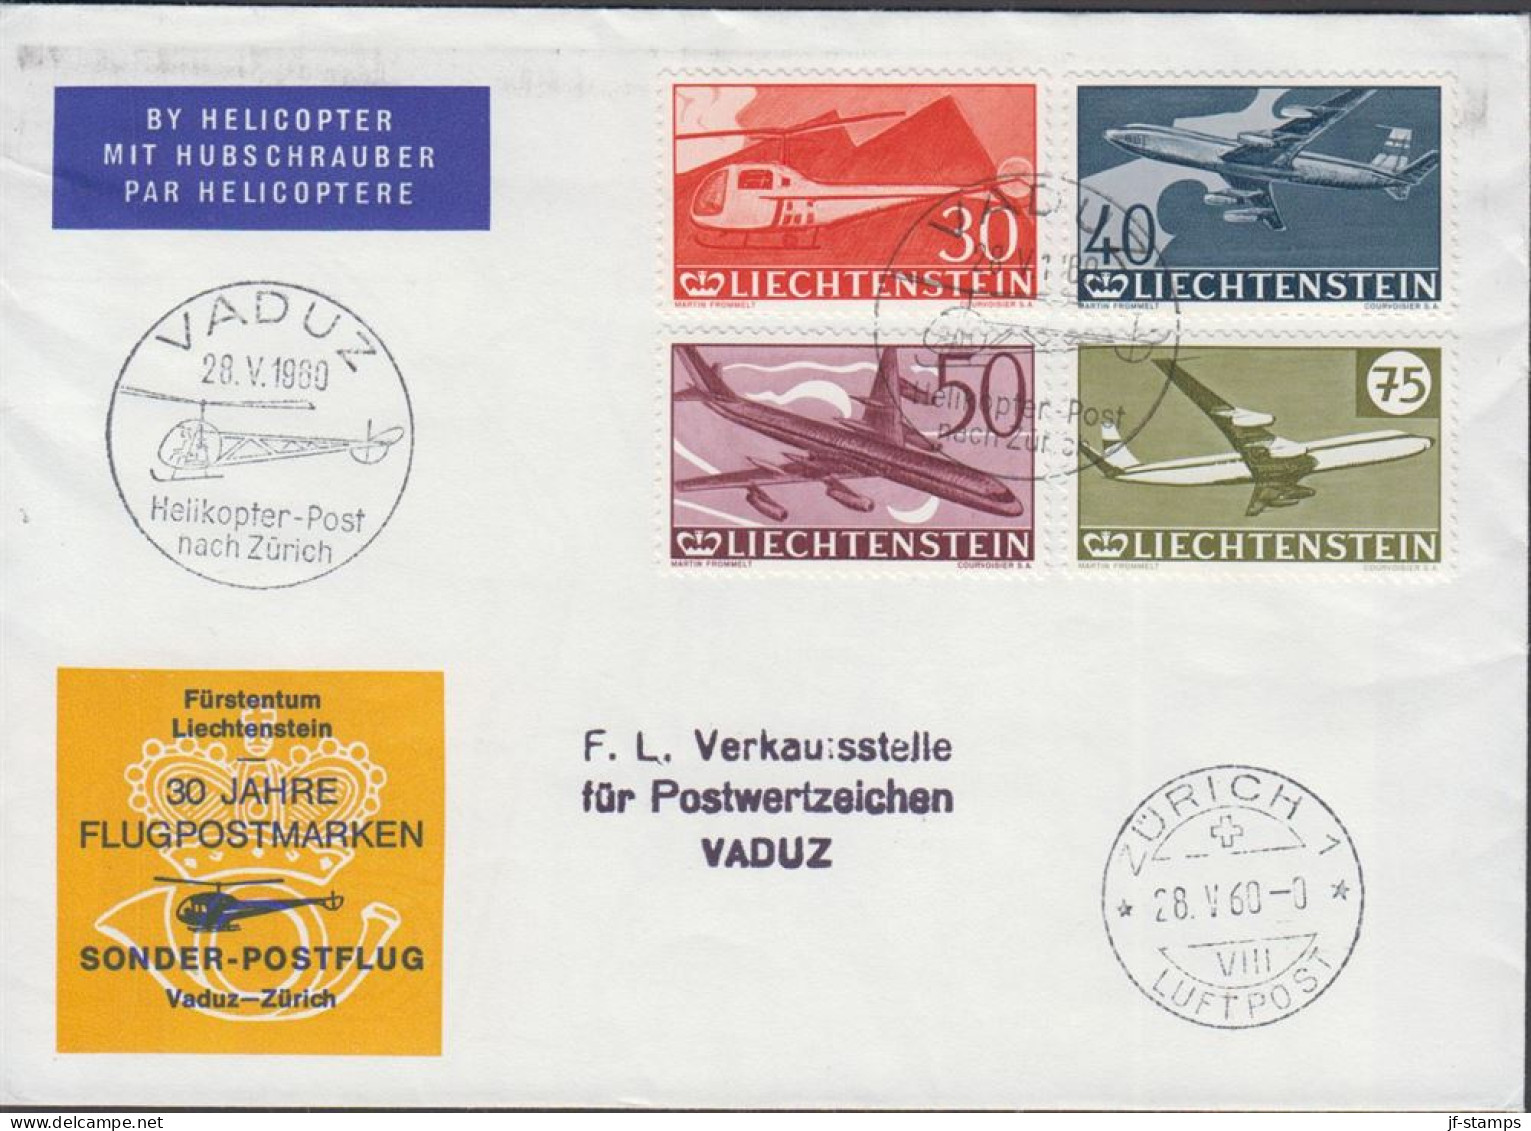 1960. LIECHTENSTEIN . Complete Set Air Mail Stamps On Fine Cover Cancelled VADUZ 28.V.196... (Michel 391-394) - JF445105 - Covers & Documents